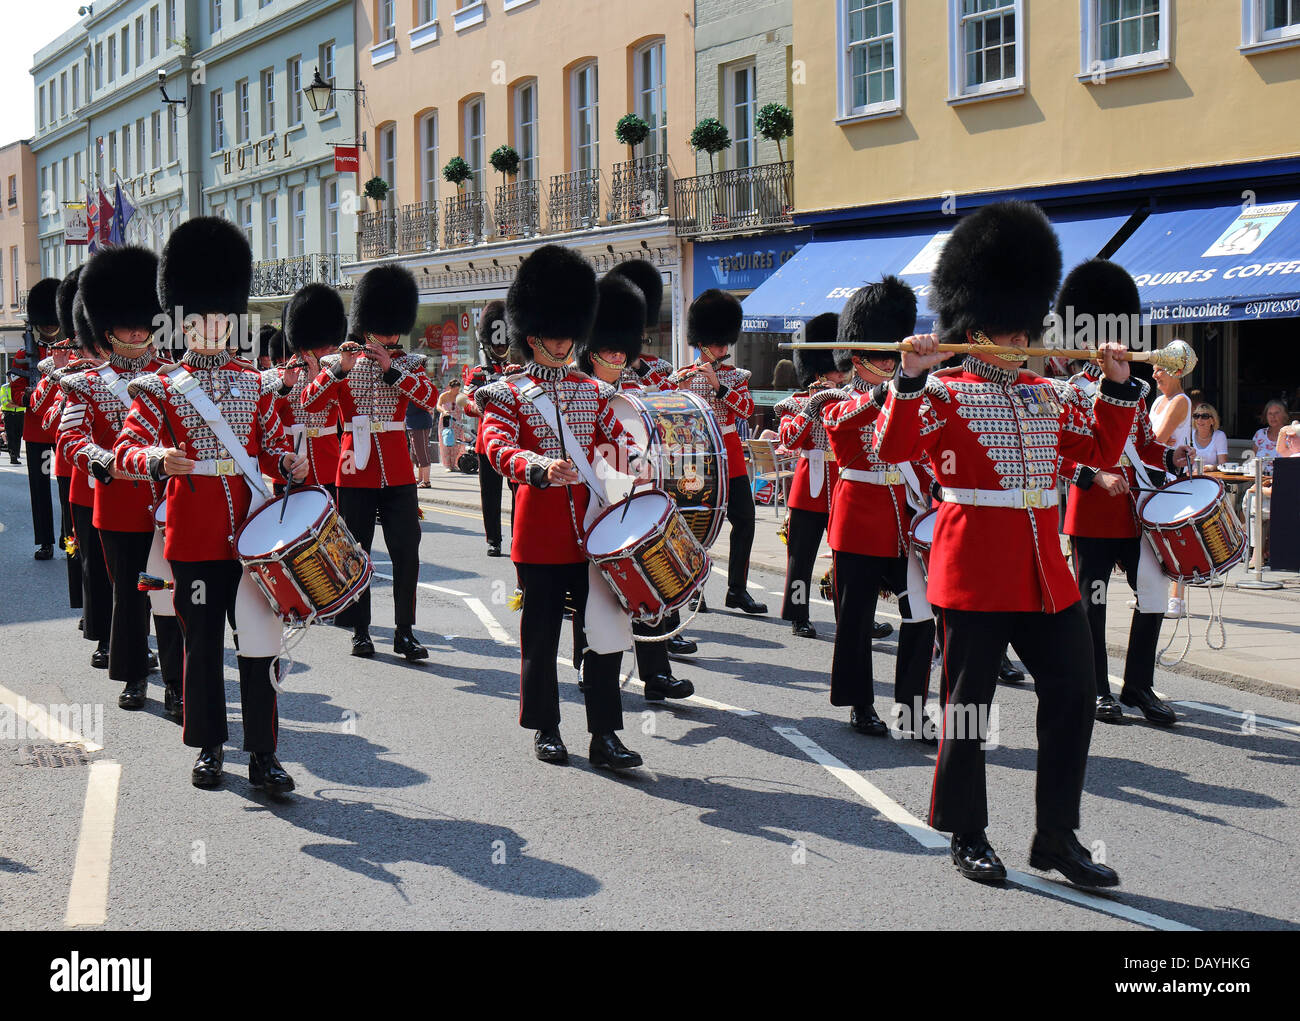 The Military Fife and Drum Band of the Grenadier Guards marching through Royal Windsor for the Changing of the Guard Ceremony Stock Photo